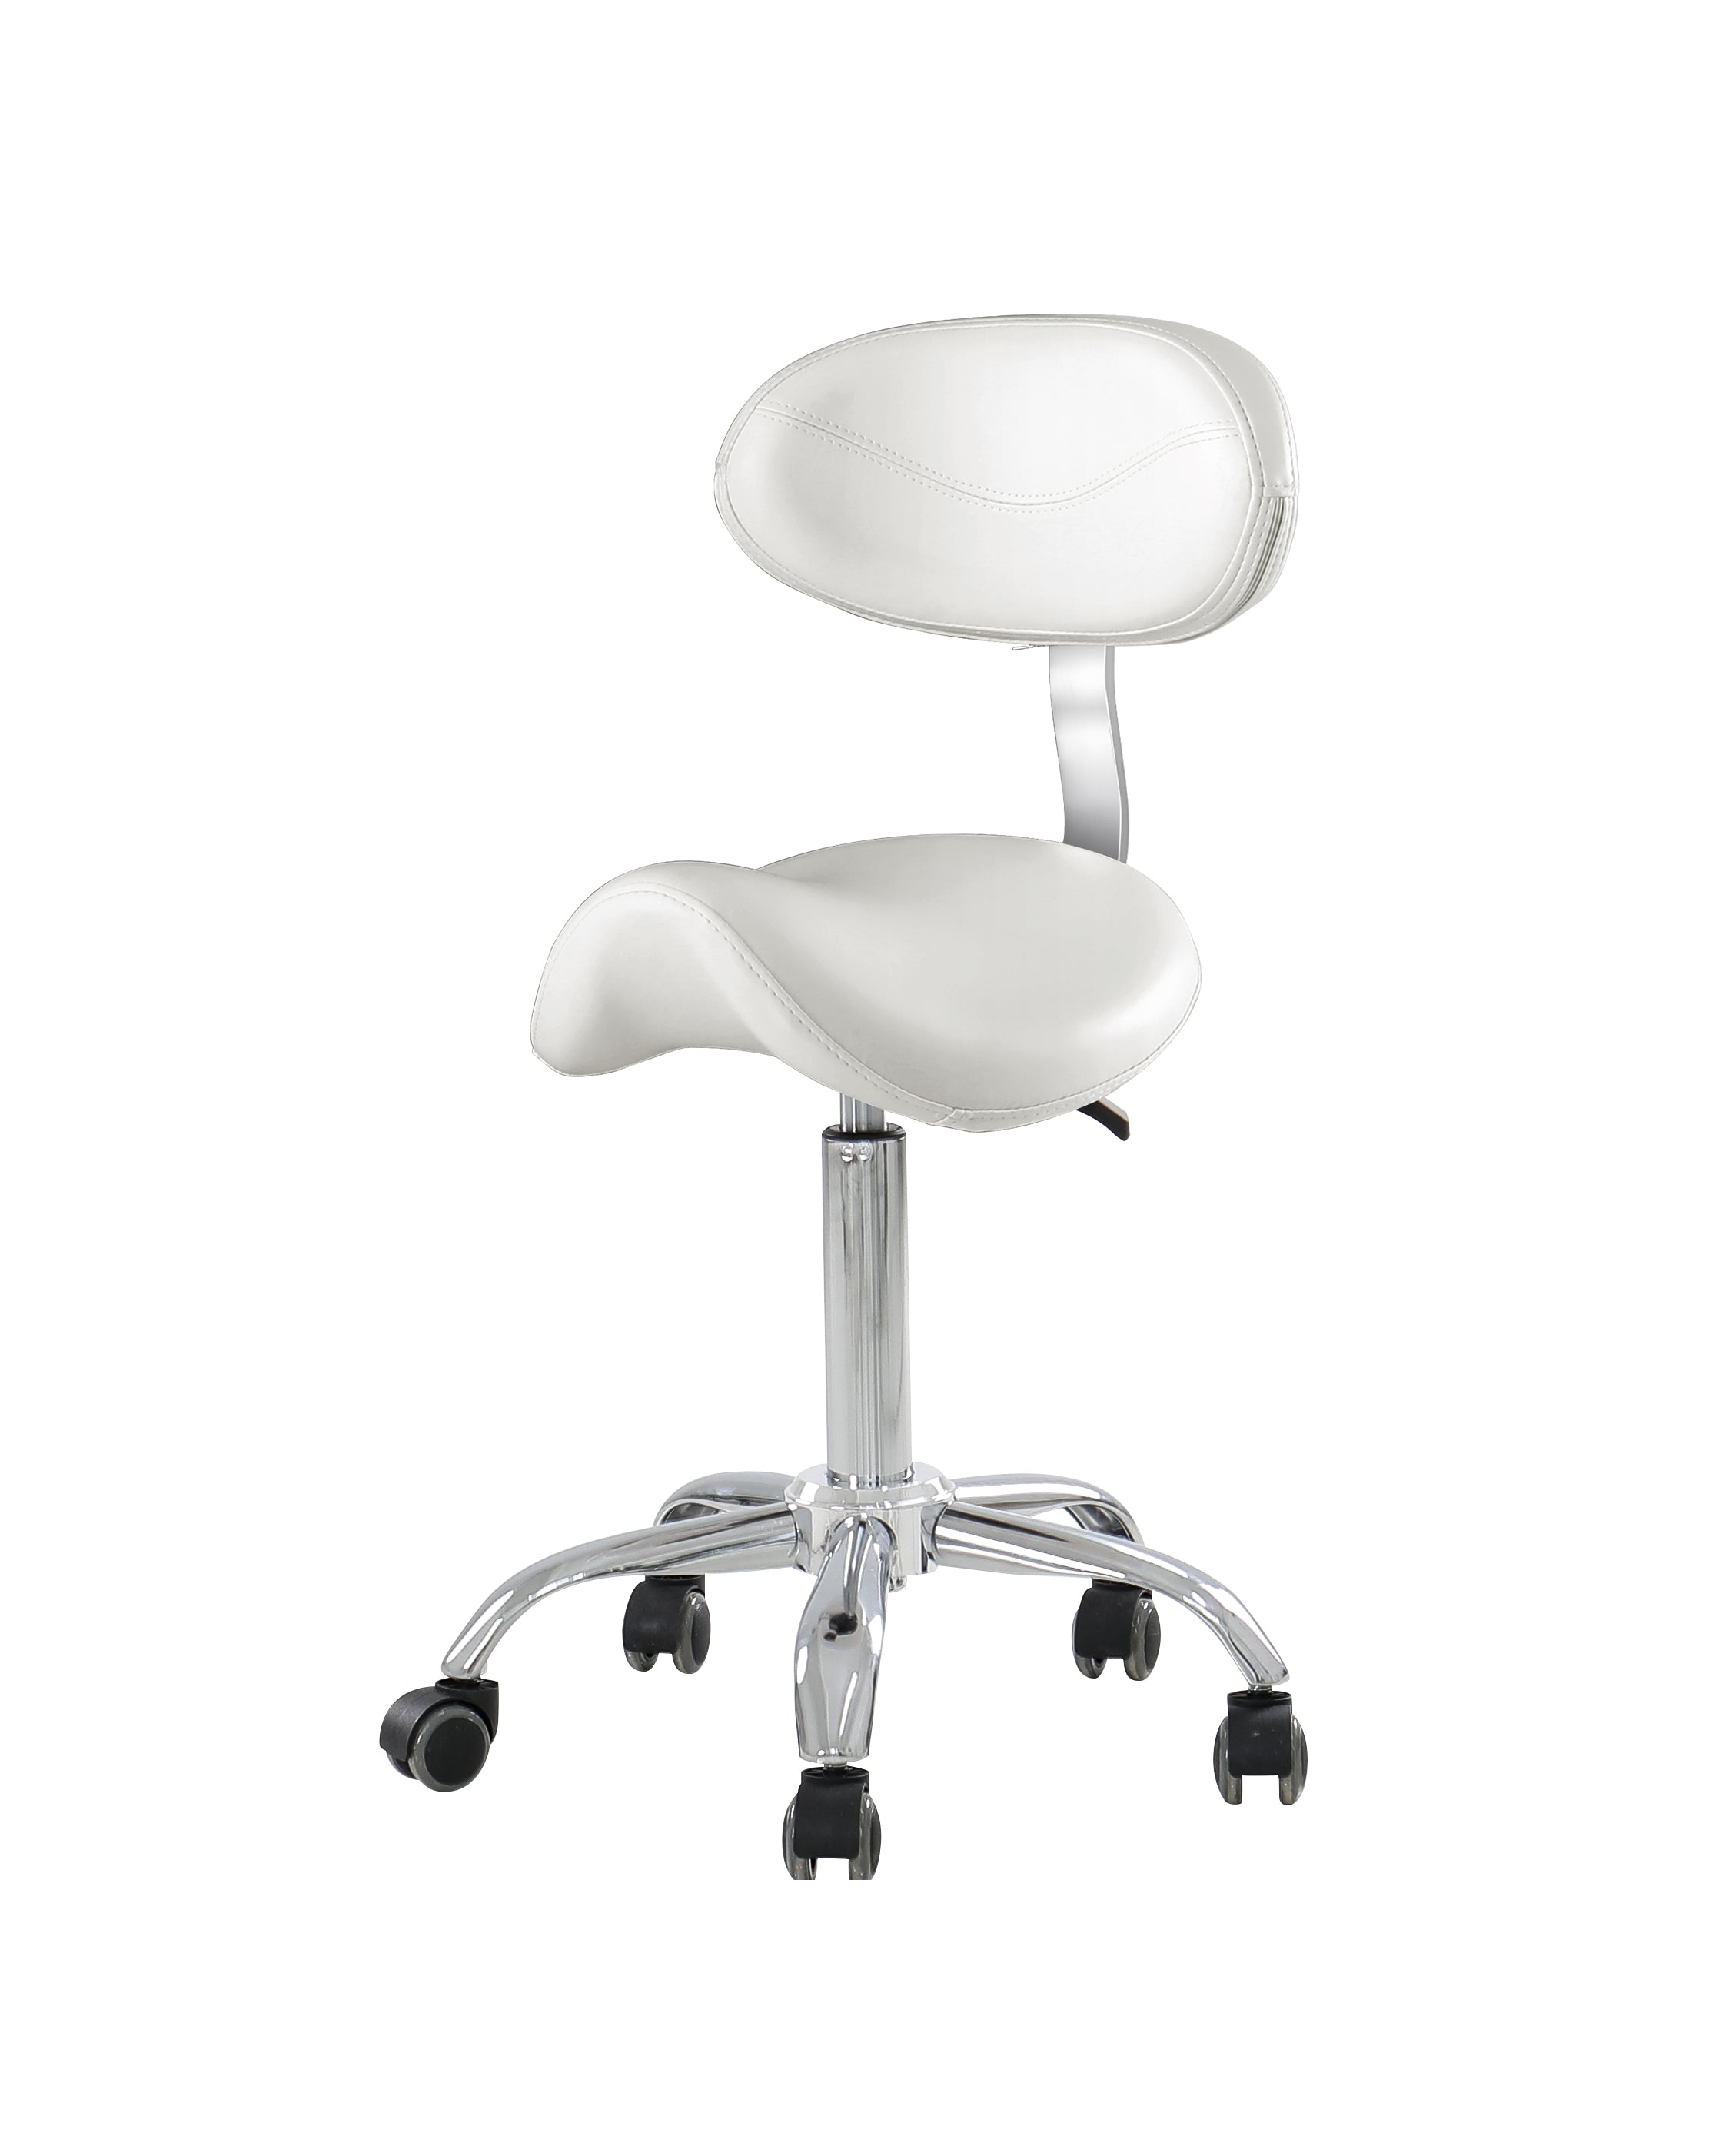 Hydraulic salon beauty saddle chair with bending support 